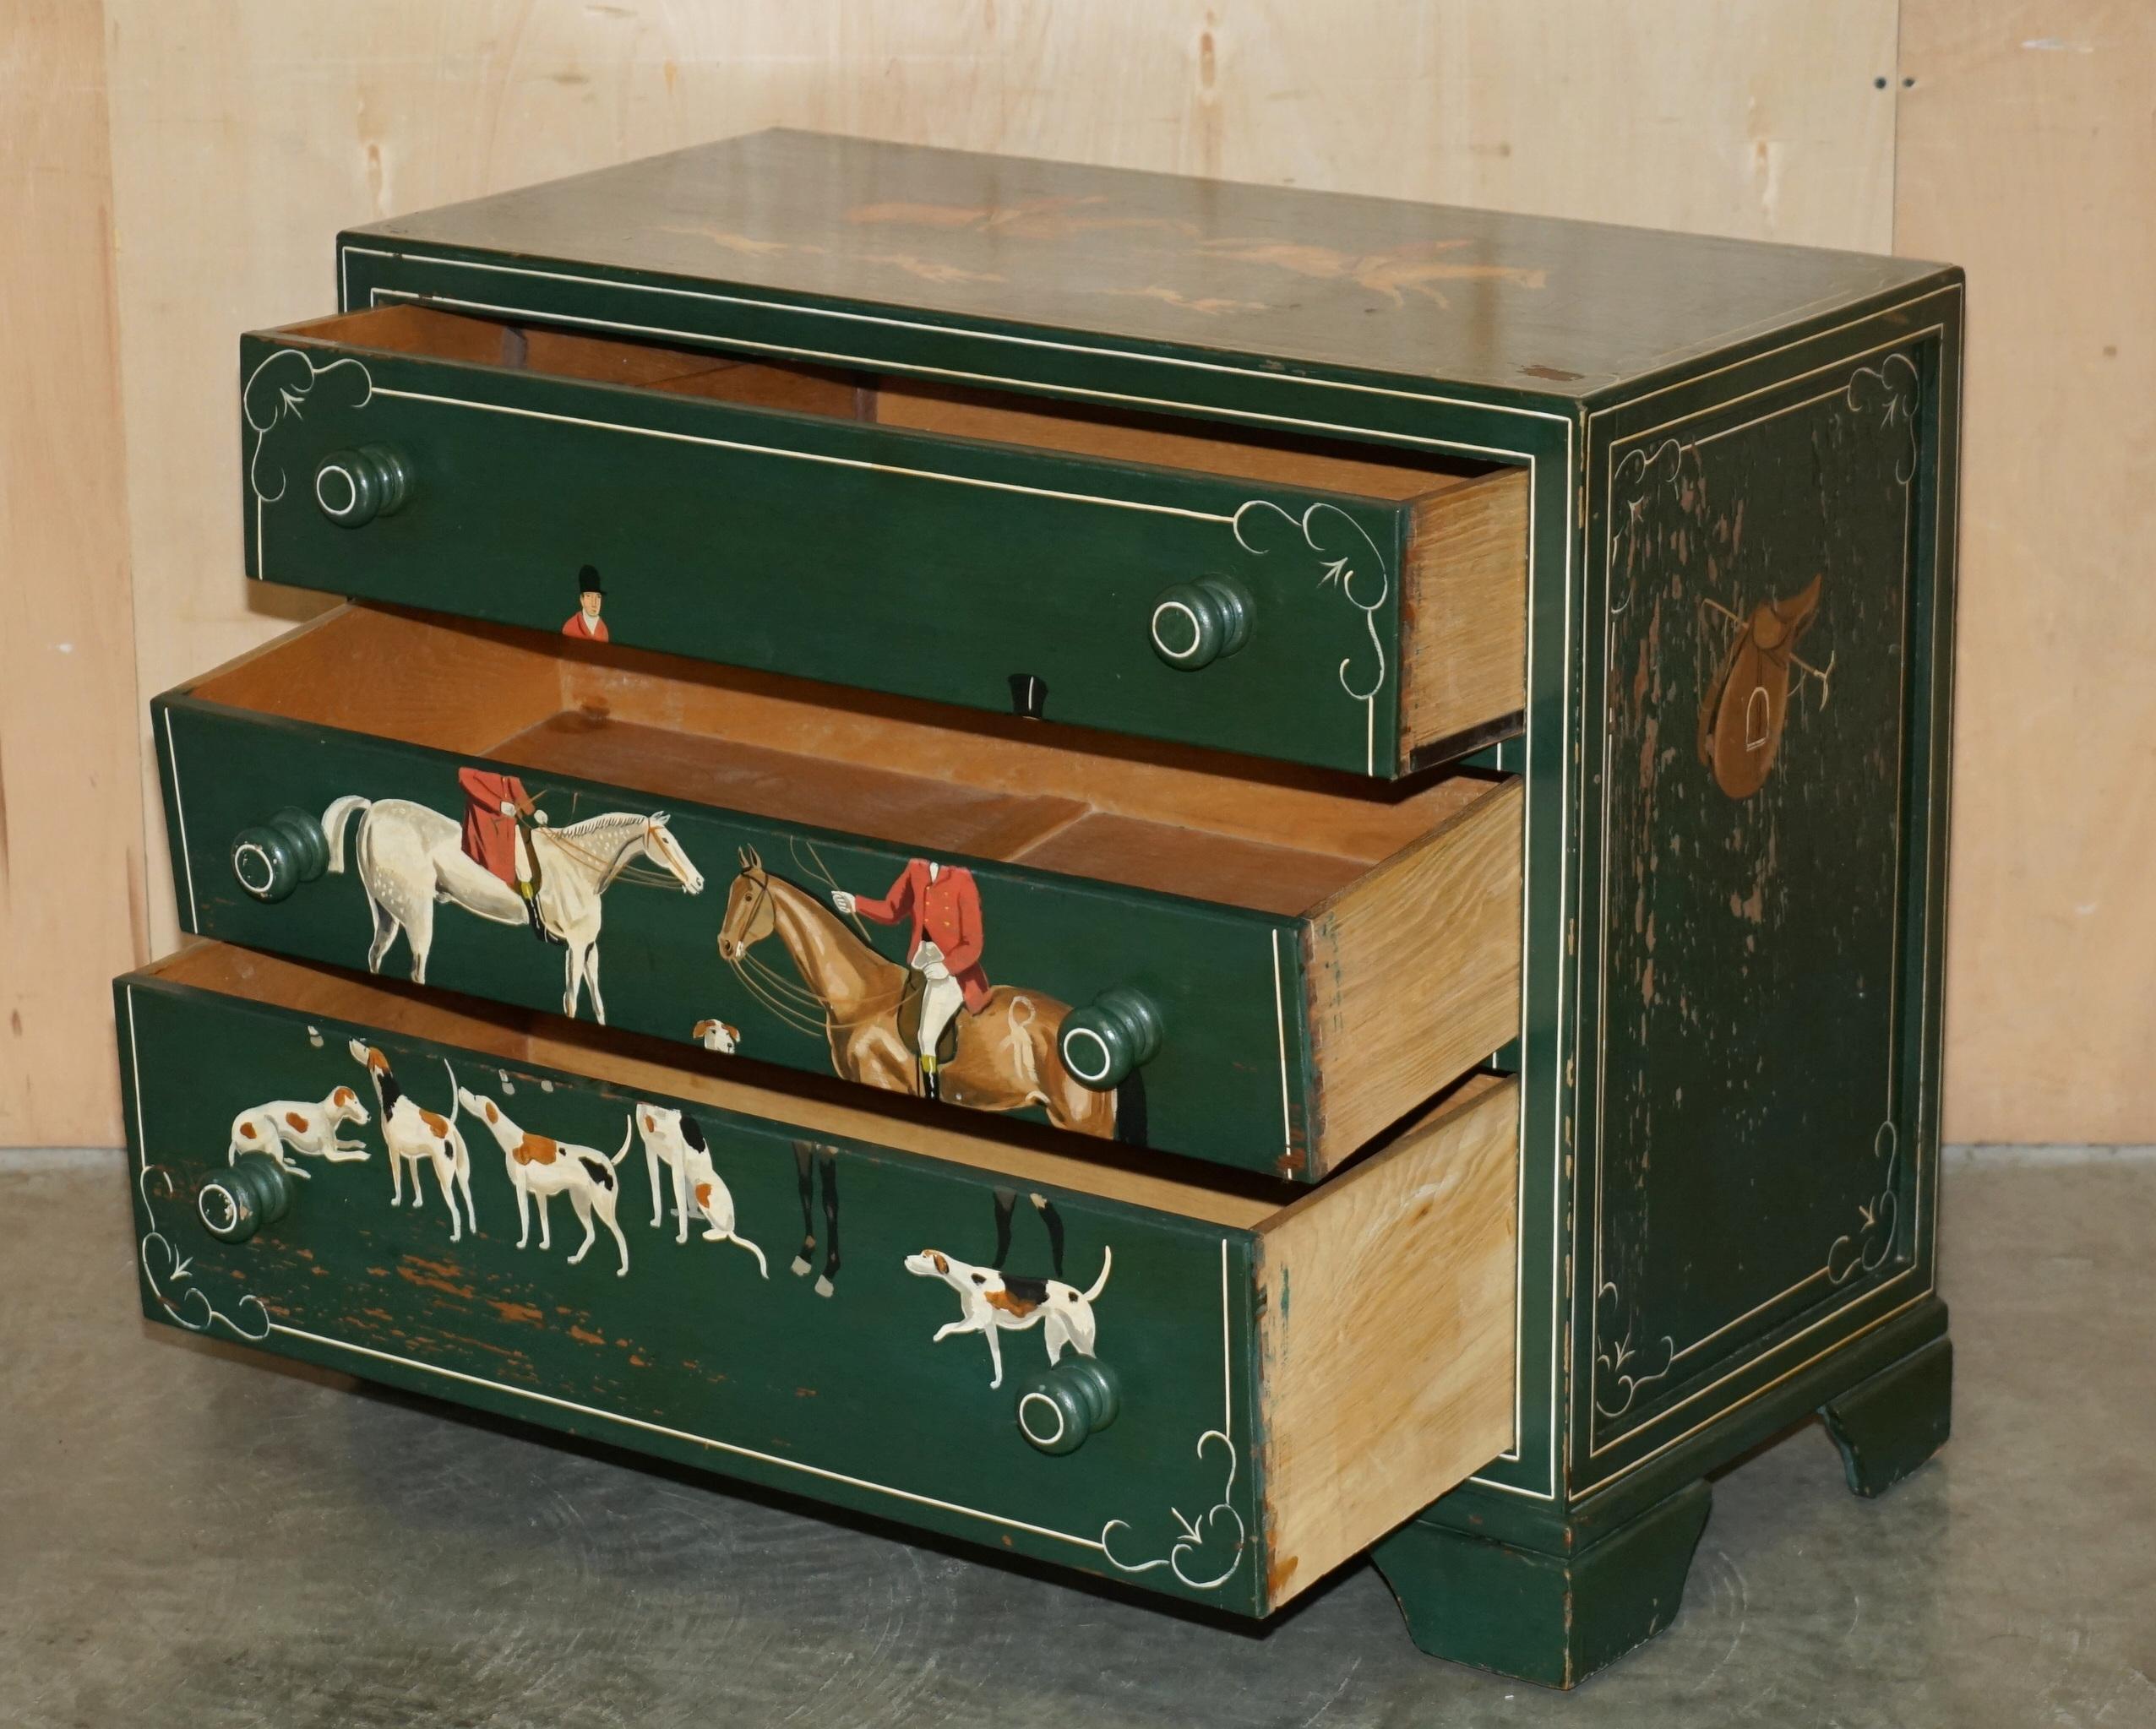 LOVELY ANTiQUE CHEST OF DRAWERS PAINTES EN GREEN DEPICTING HORSE & RIDER CIRCA 1900 en vente 11